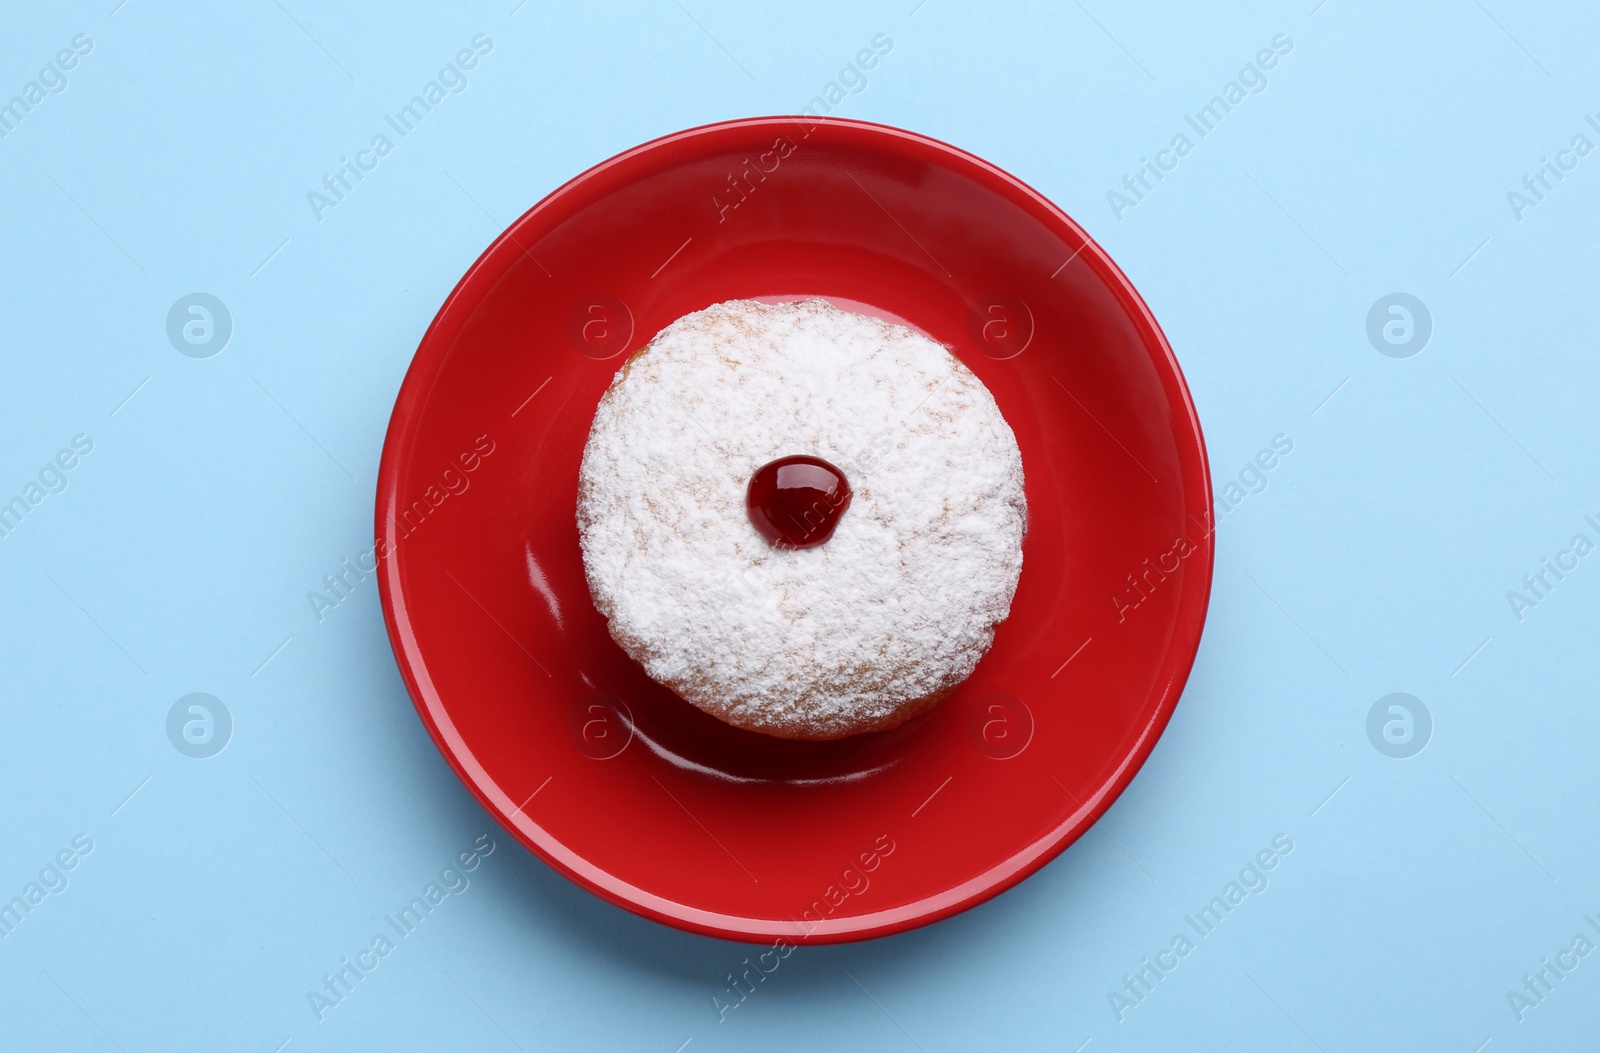 Photo of Hanukkah donut with jelly and powdered sugar on light blue background, top view